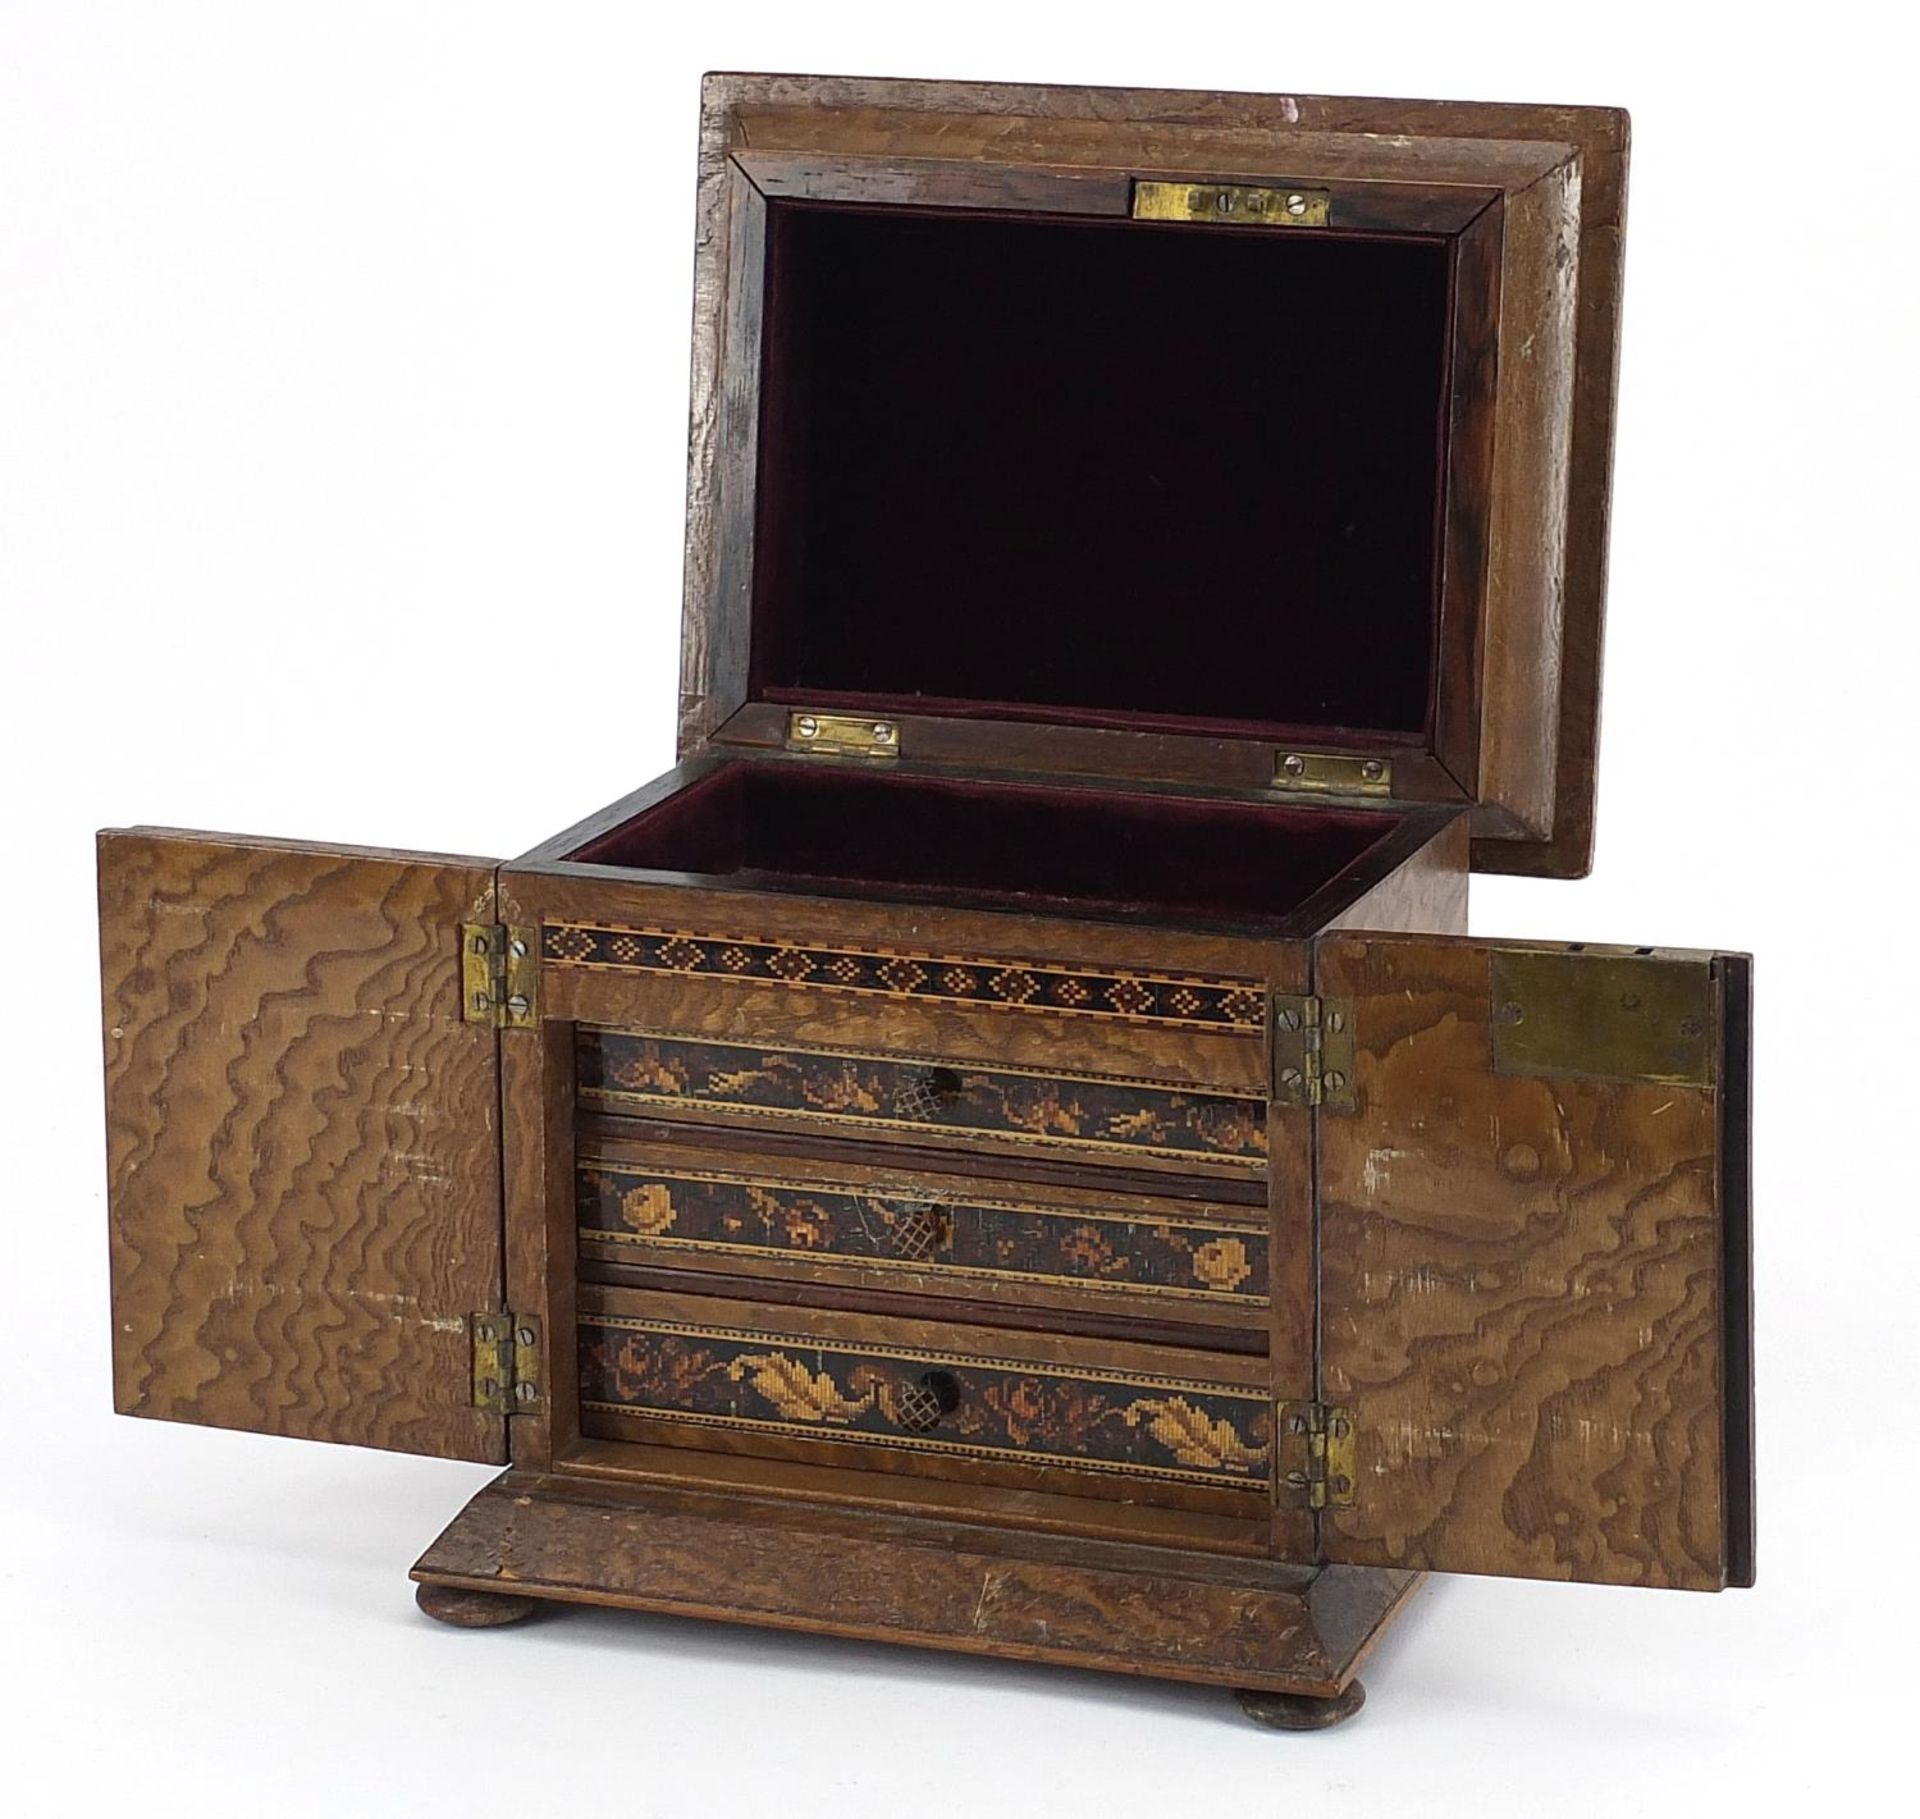 Victorian Tunbridge Ware tumbling block design jewellery chest with lift up top above two doors - Image 2 of 4